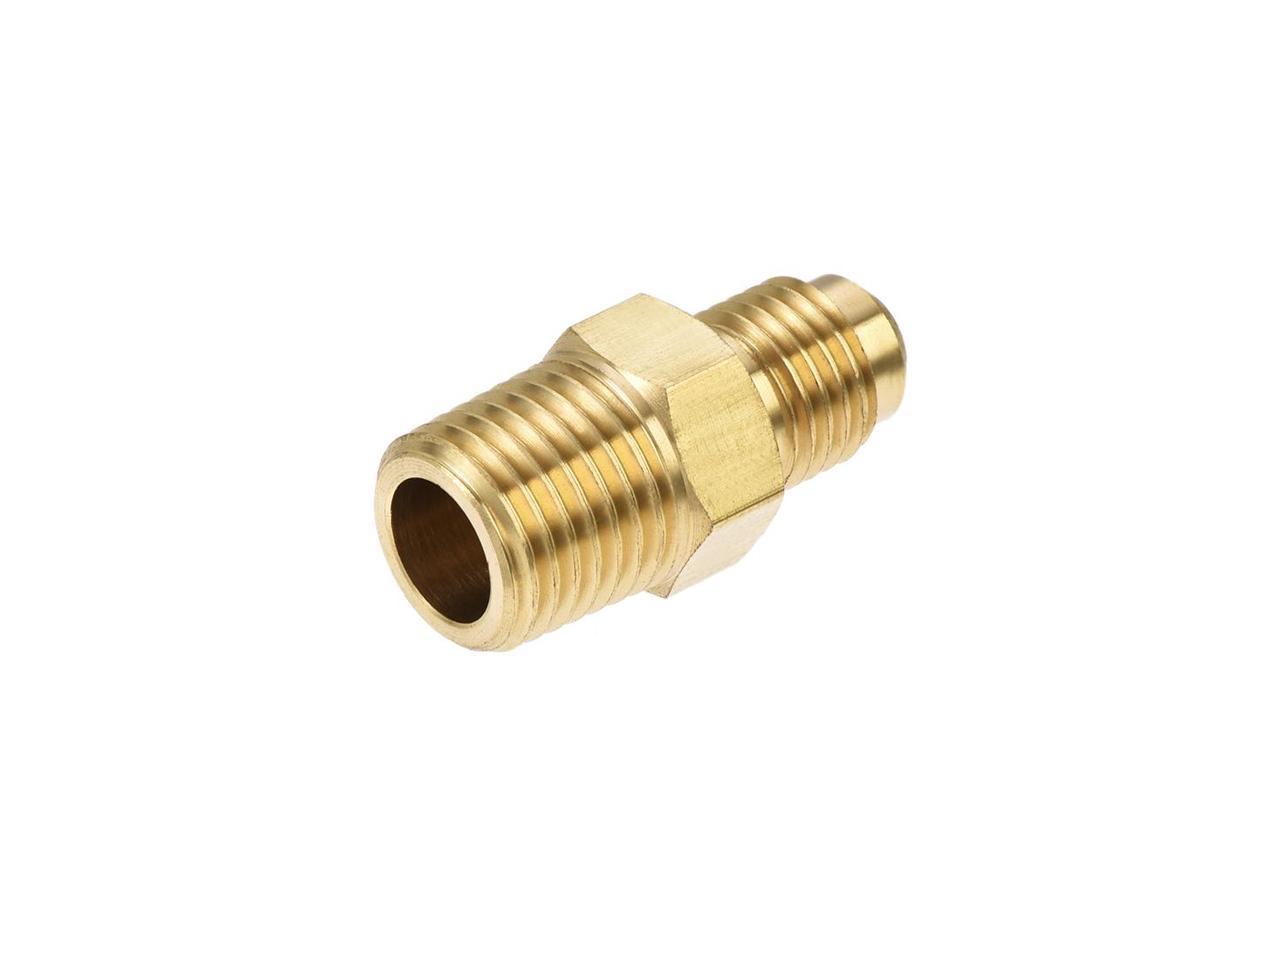 TUBING Flare 45 DEGREE FLARE CONE SAE Male Plug FOR 1/4" O.D Brass 